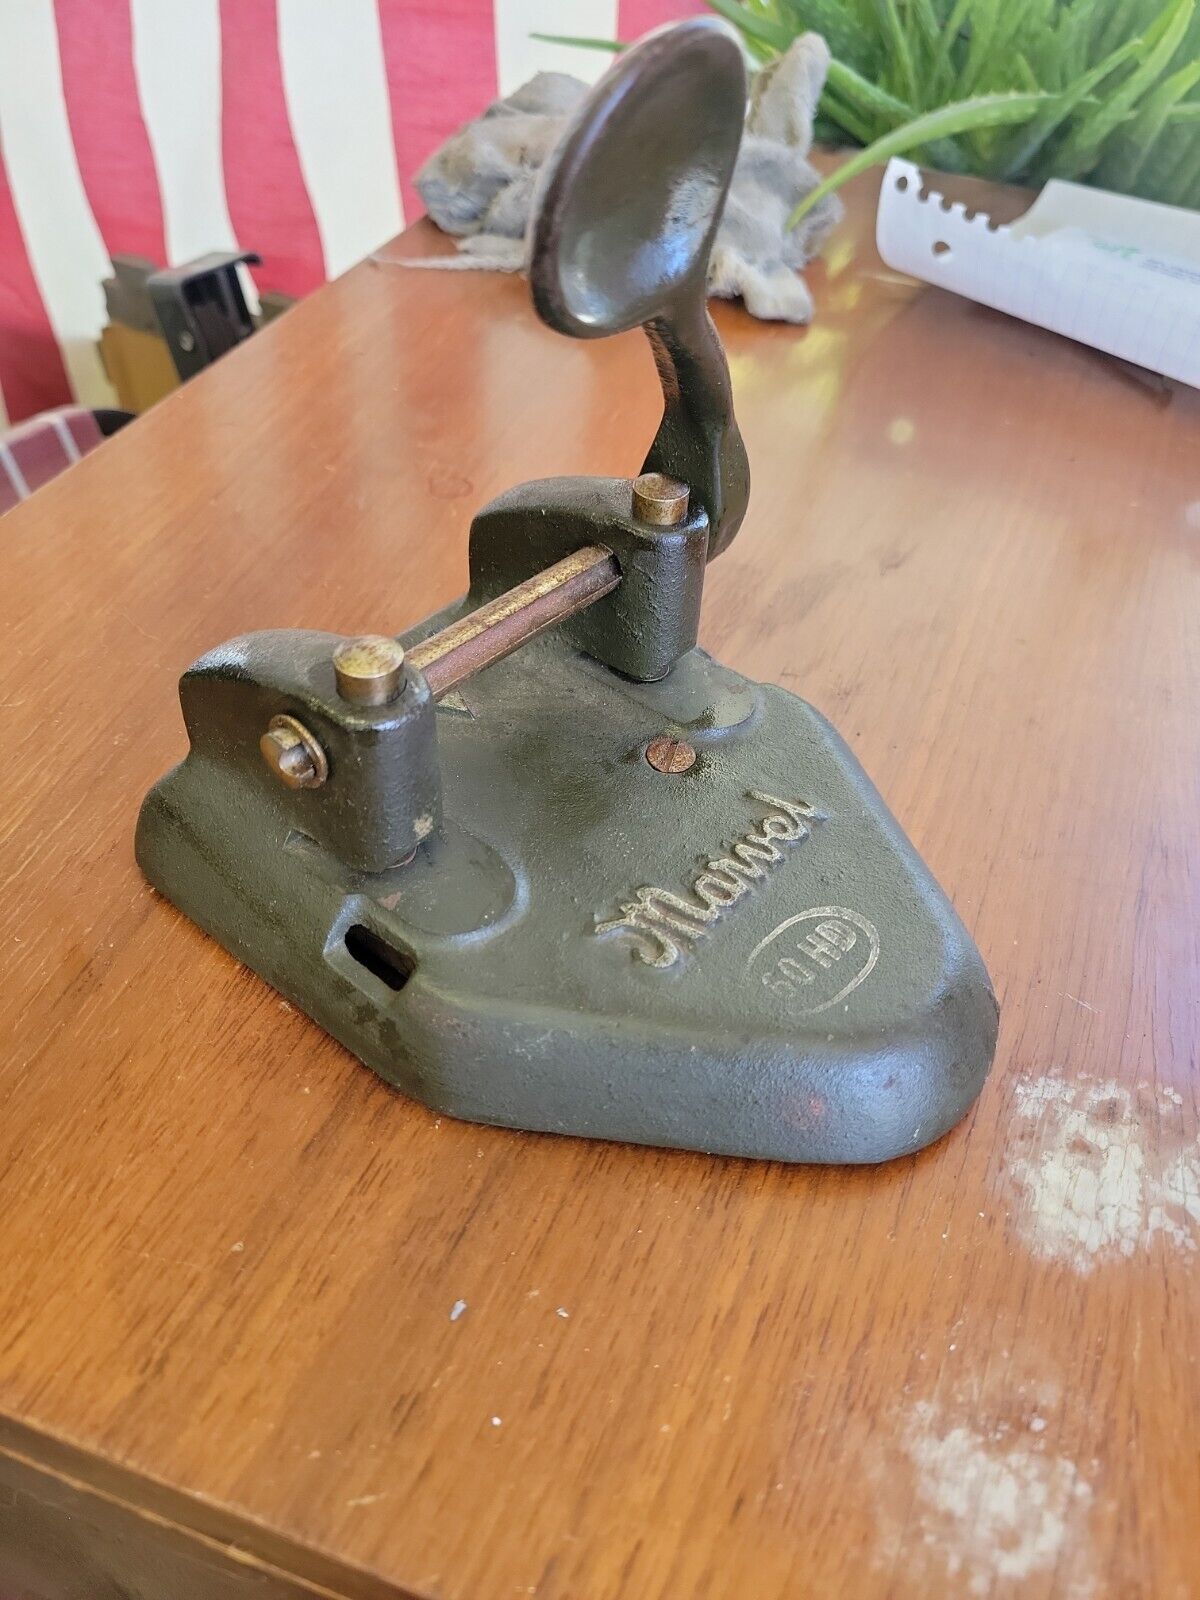 VNTG Marvel Cast Iron 2 Hole Punch By Wilson Jones Co. Chicago USA 